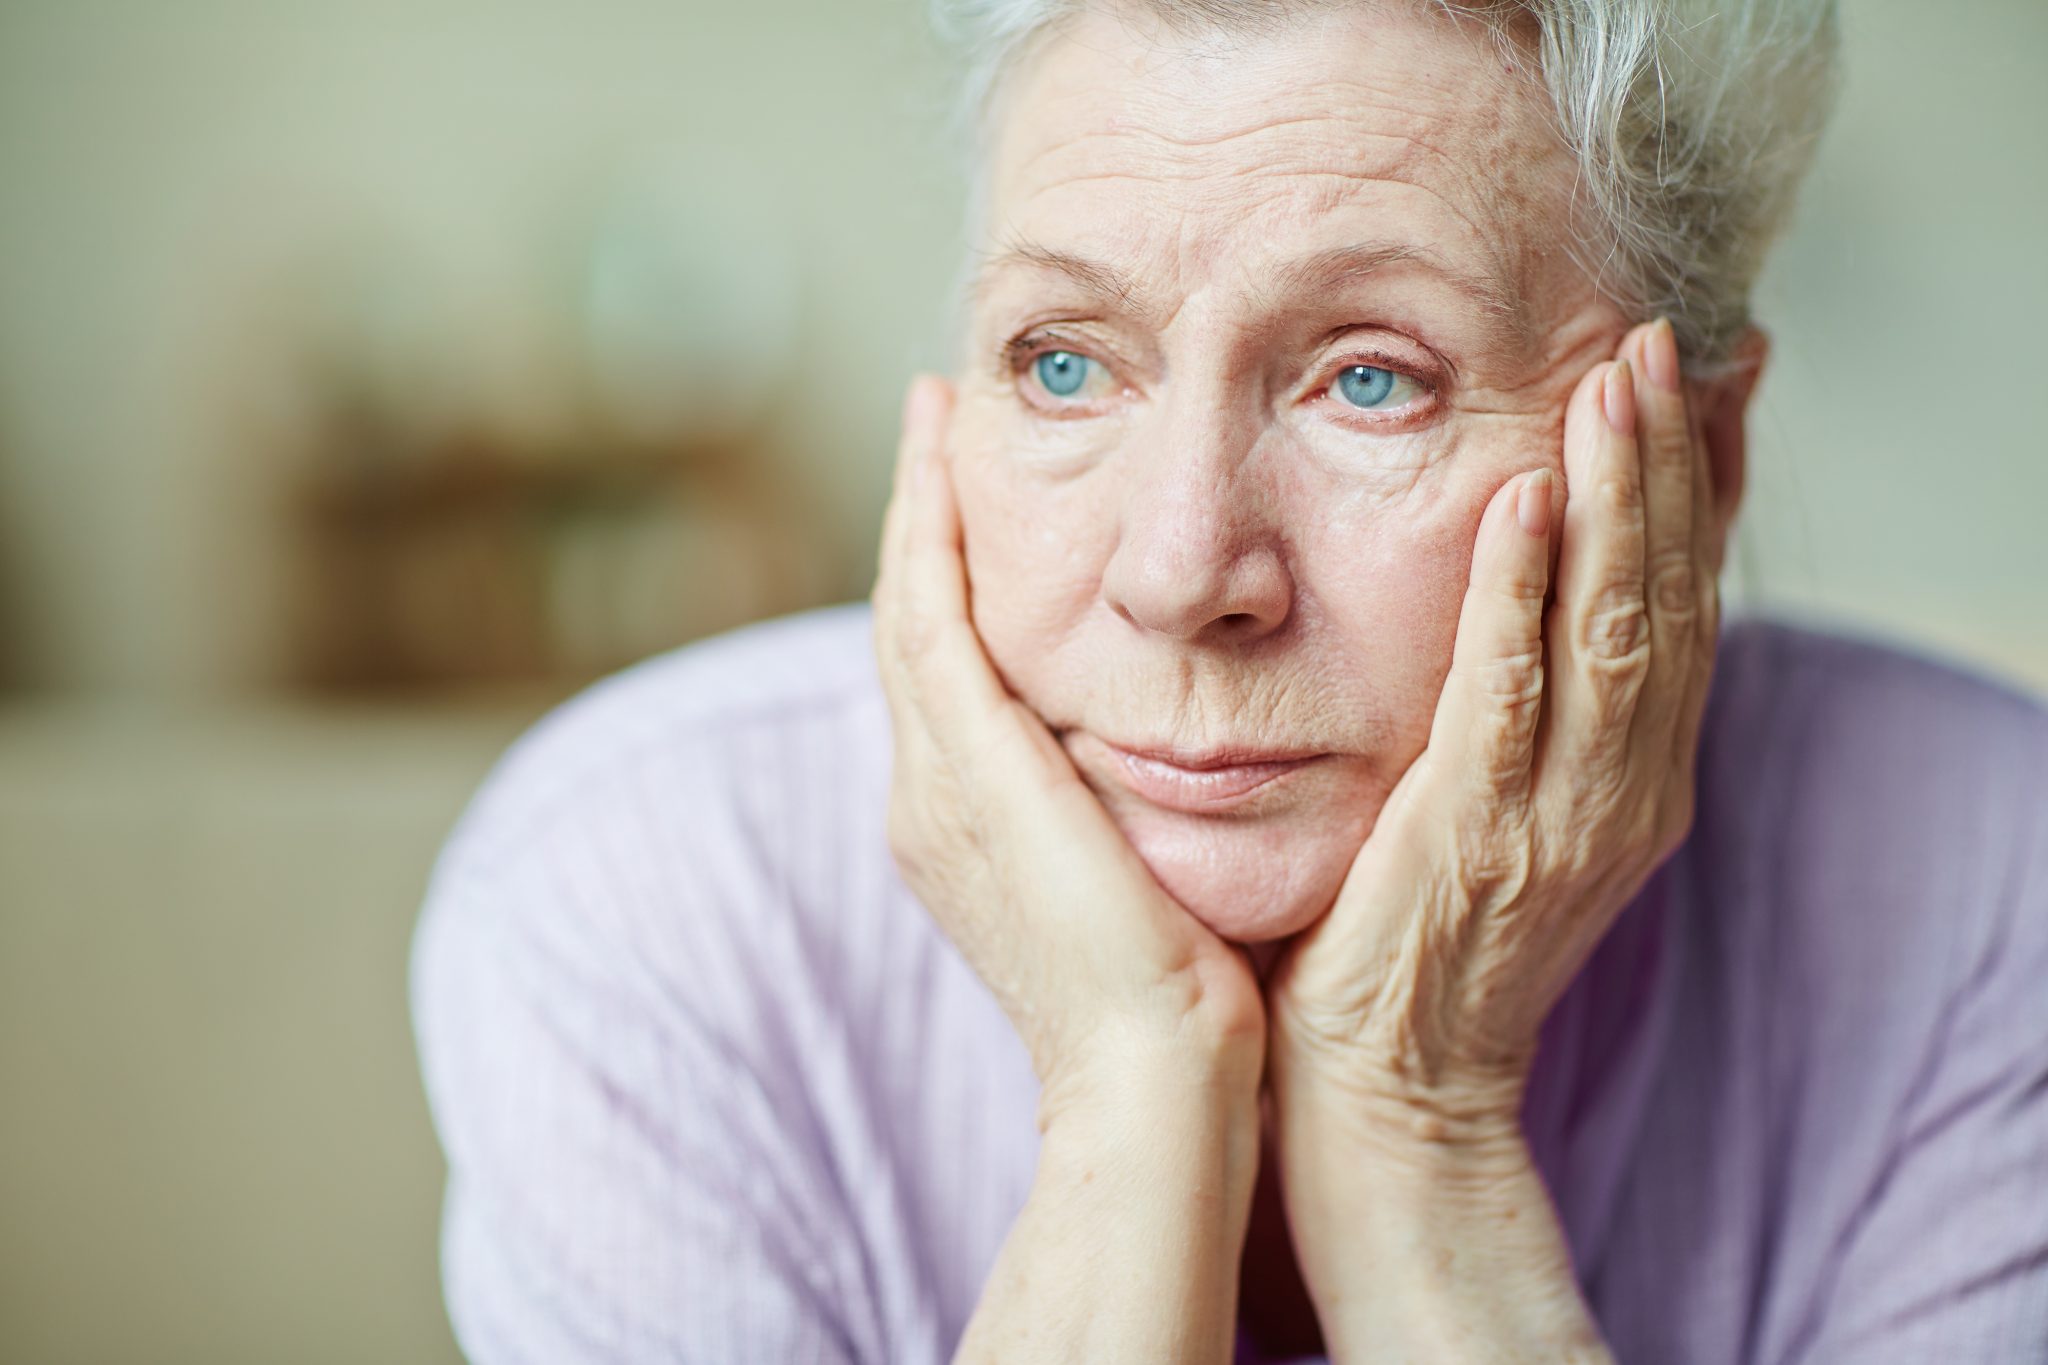 Behavioral And Psychological Symptoms Of Dementia - Symptoms And Management